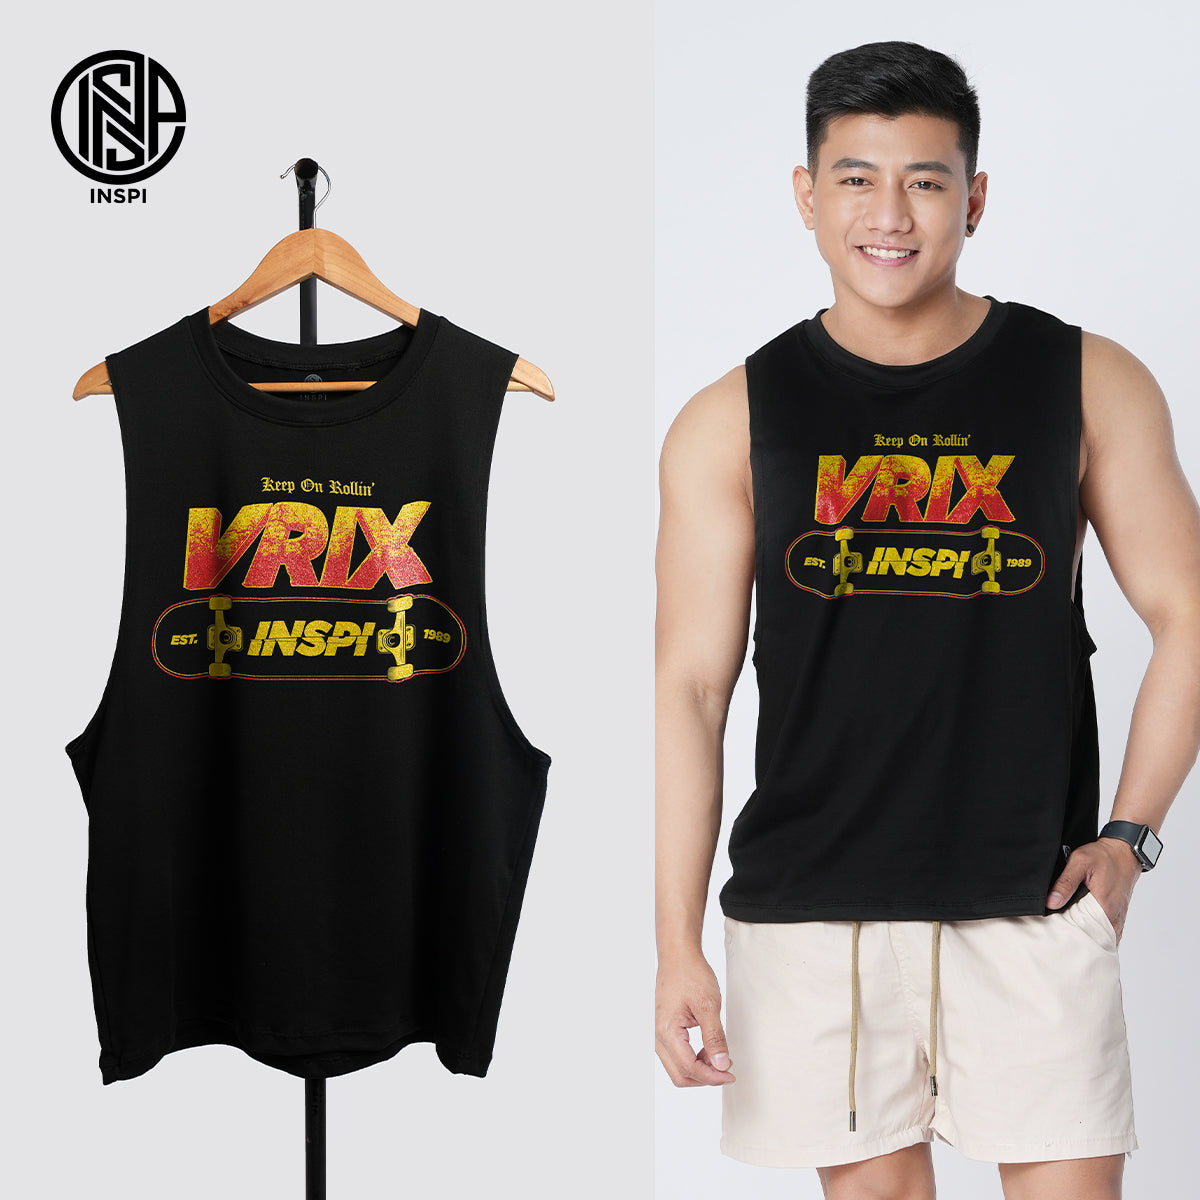 INSPI x Vrix Printed Muscle Tee Activewear Workout Gym Outfit.